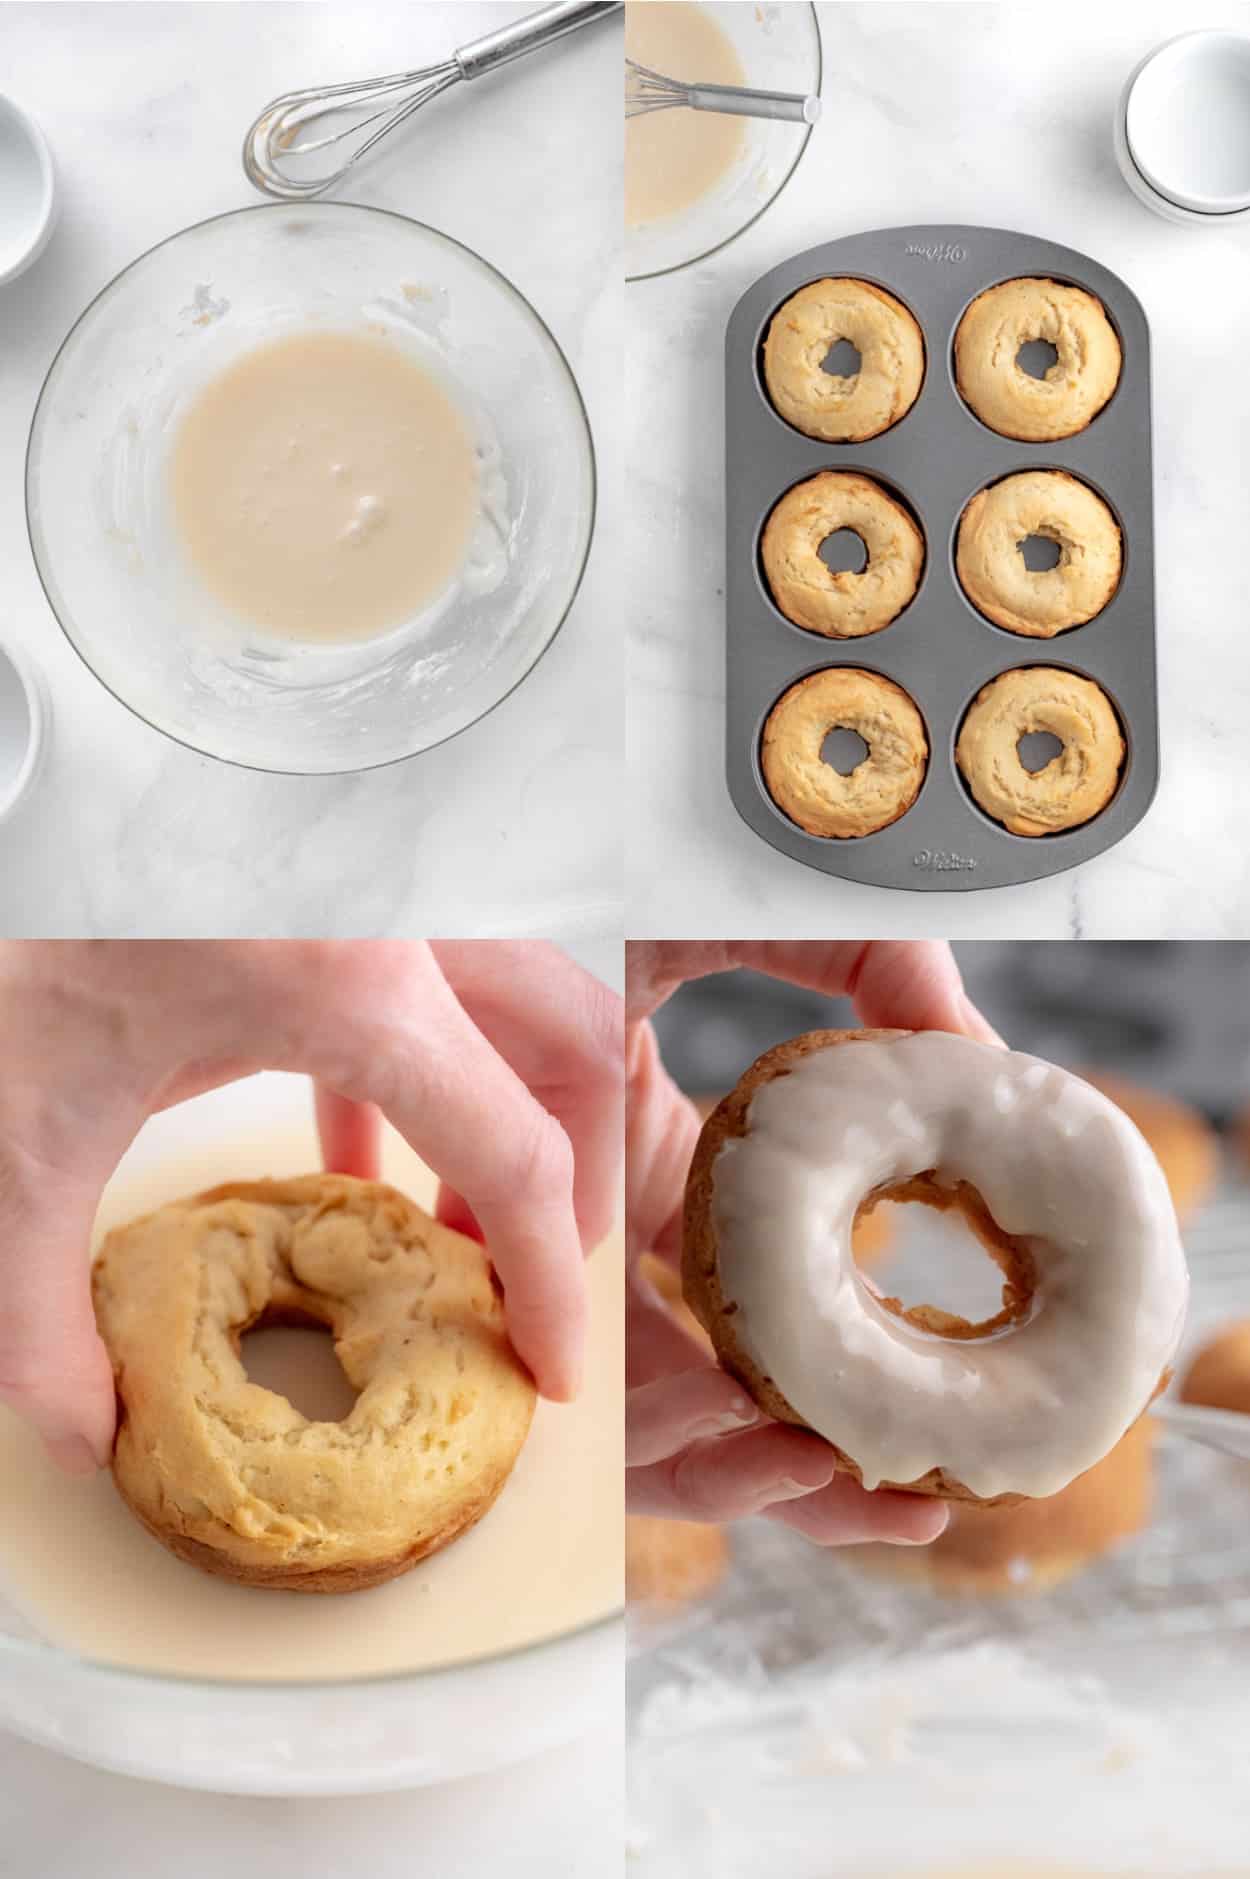 Four process photos. First one, icing mixed in a bowl. Second one, baked donuts out of the oven. Third one, donut being dipped into the glaze. Fourth one, dipped glazed donut being held in a hand.